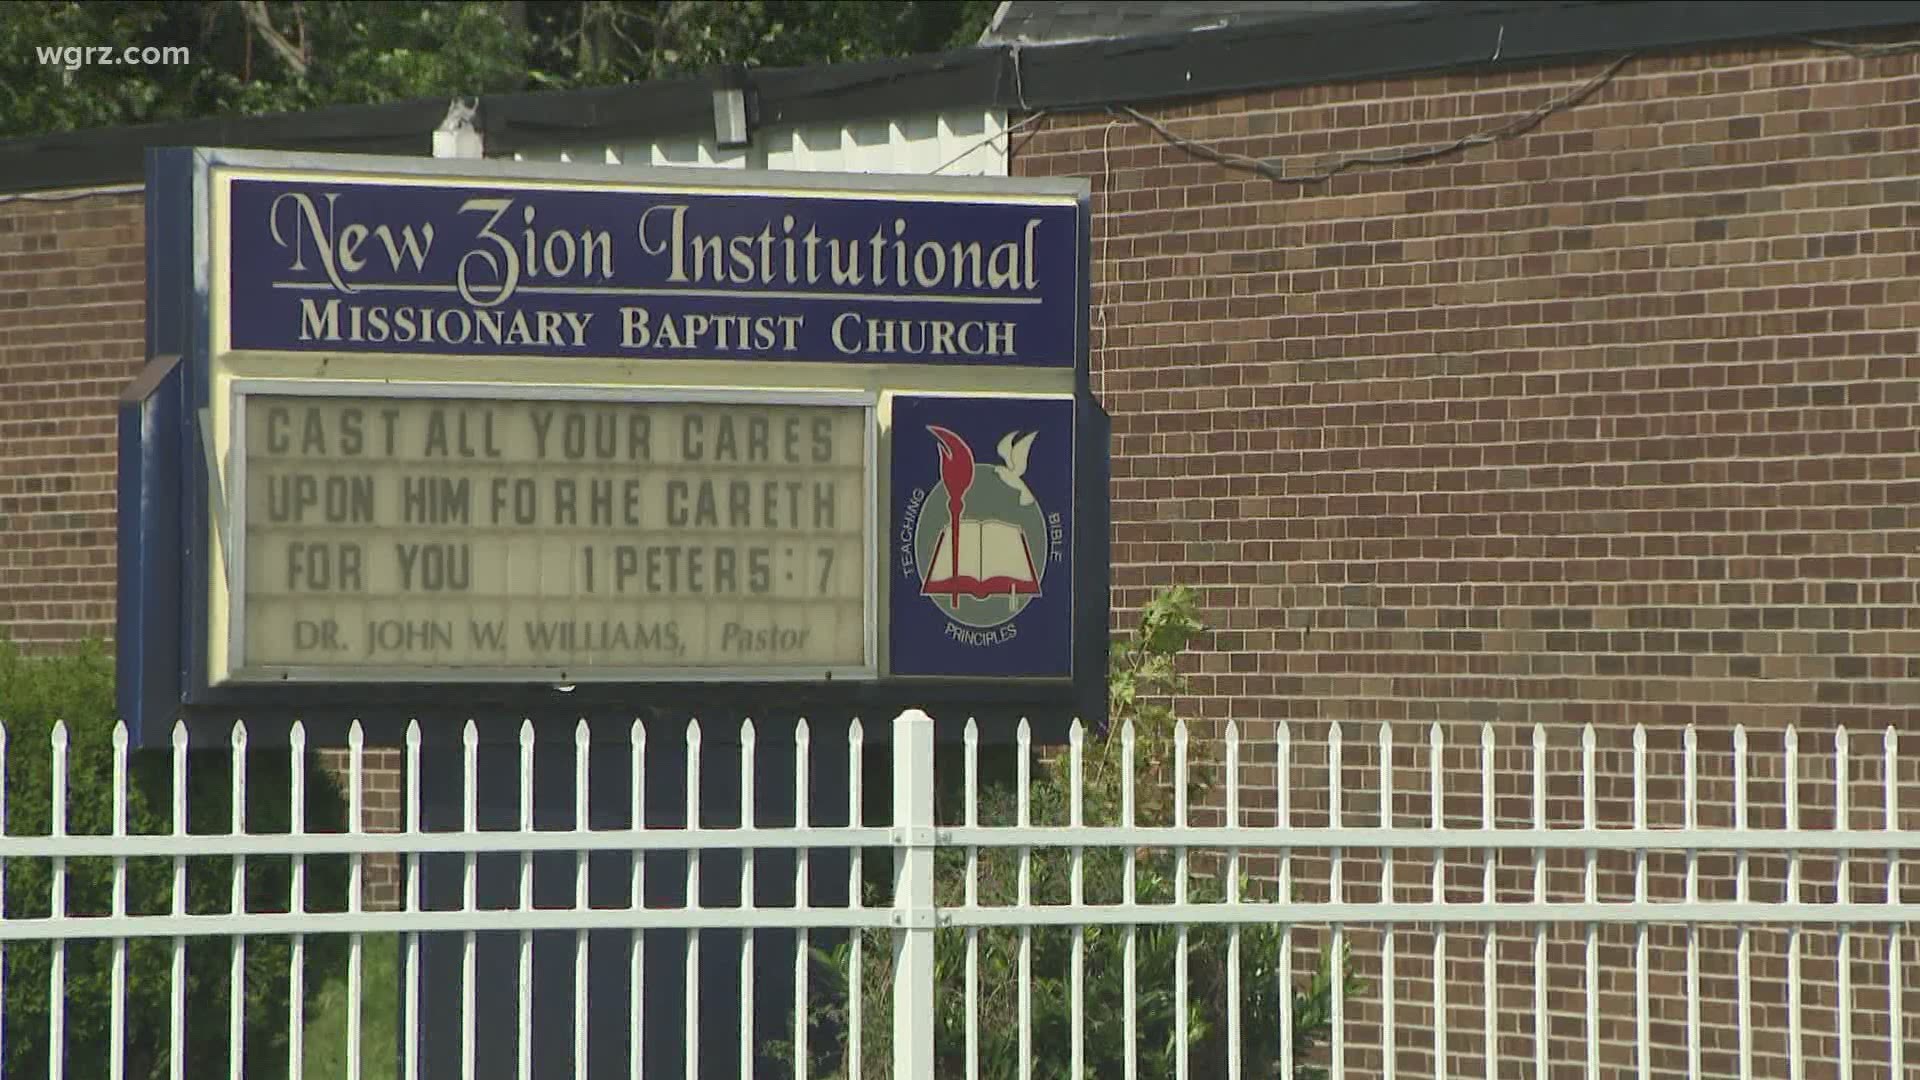 10 people associated with the New Zion Baptist Church had tested positive for Covid 19,